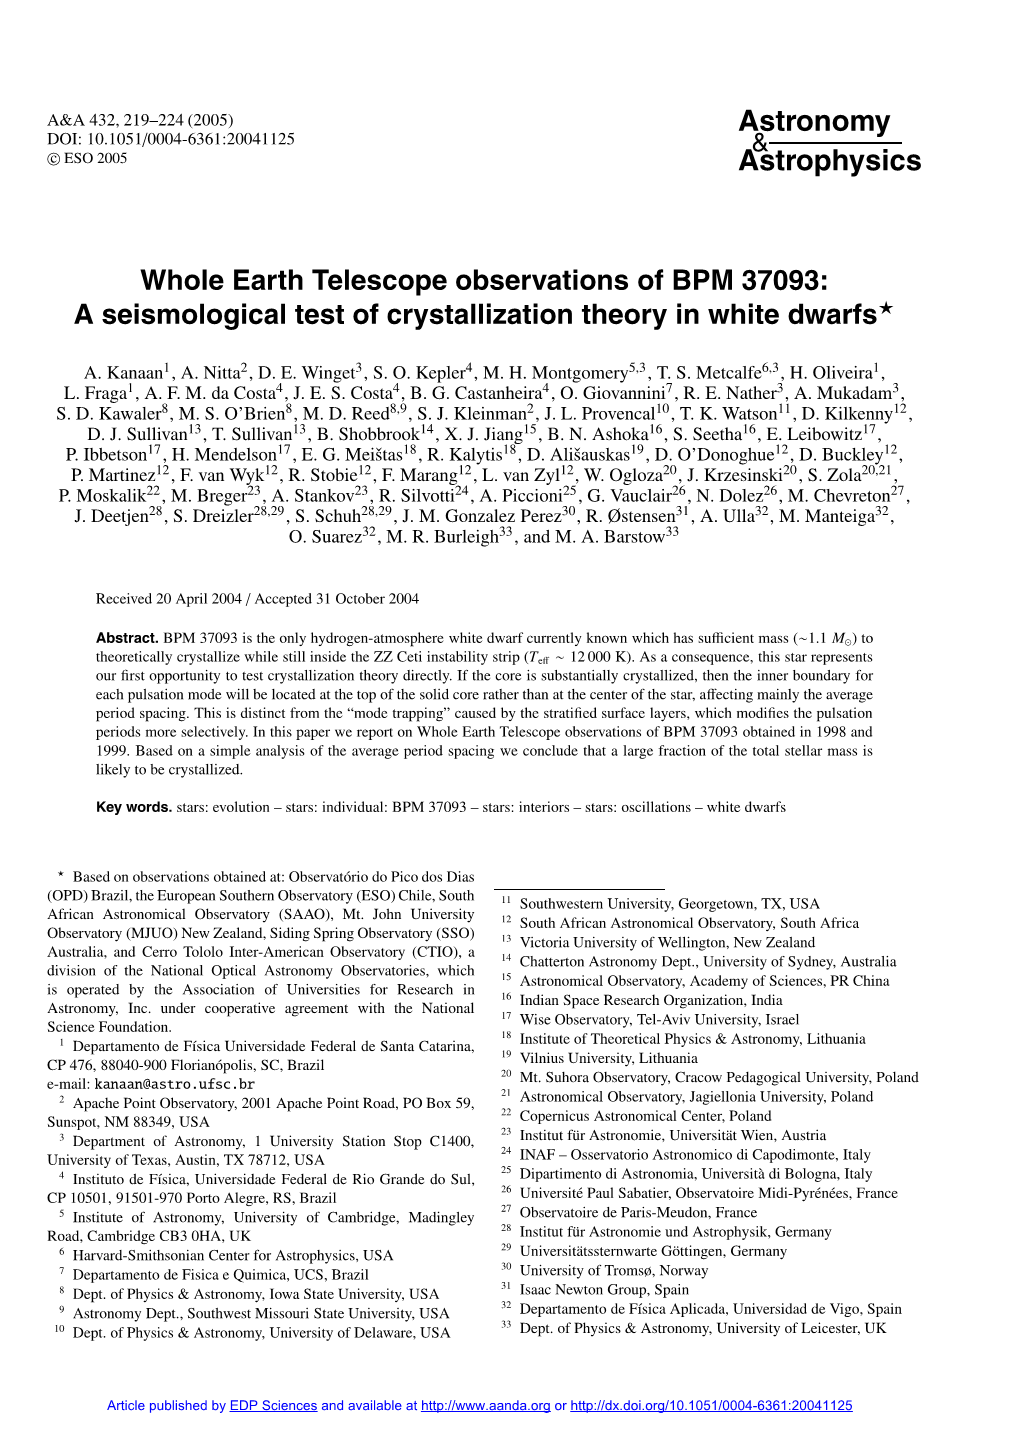 Whole Earth Telescope Observations of BPM 37093: a Seismological Test of Crystallization Theory in White Dwarfs